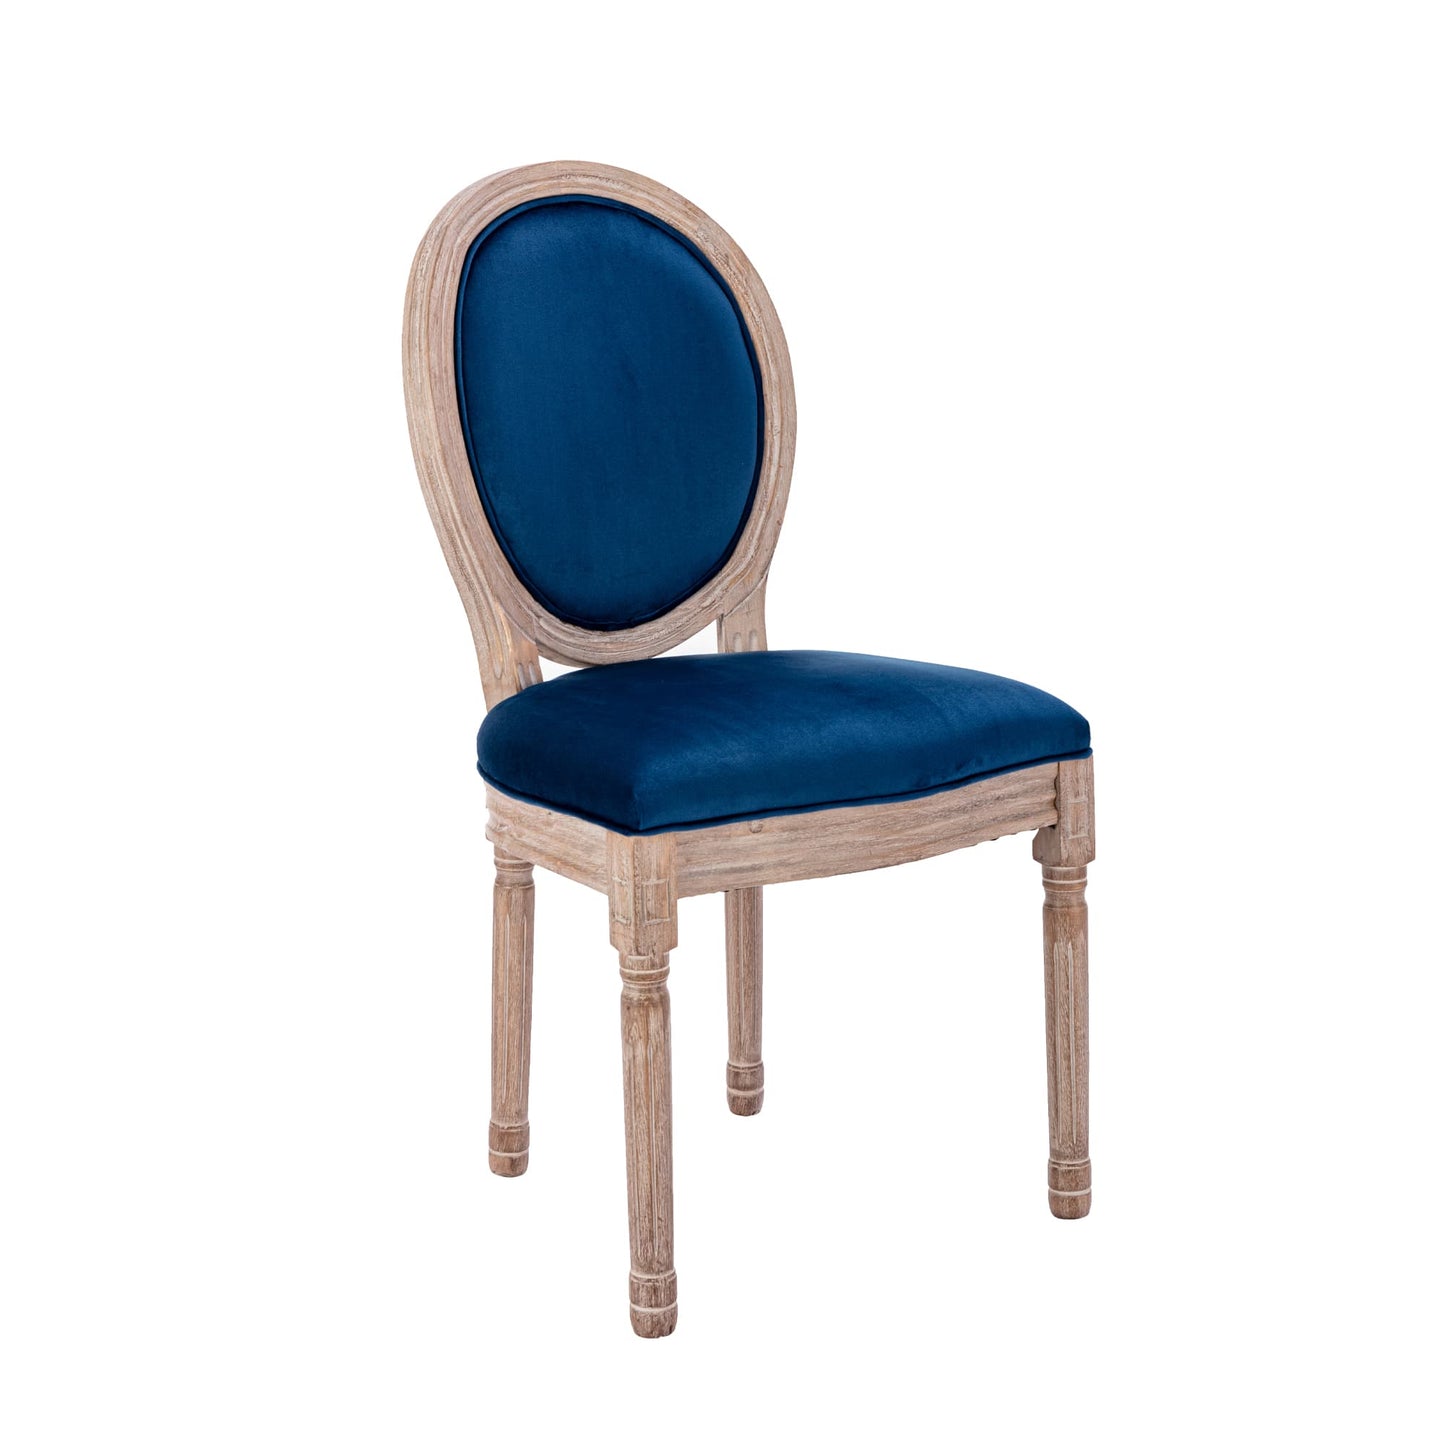 SogesPower Upholstered Fabrice French Dining Chair with rubber legs,Set of 2- Blue+Velvet